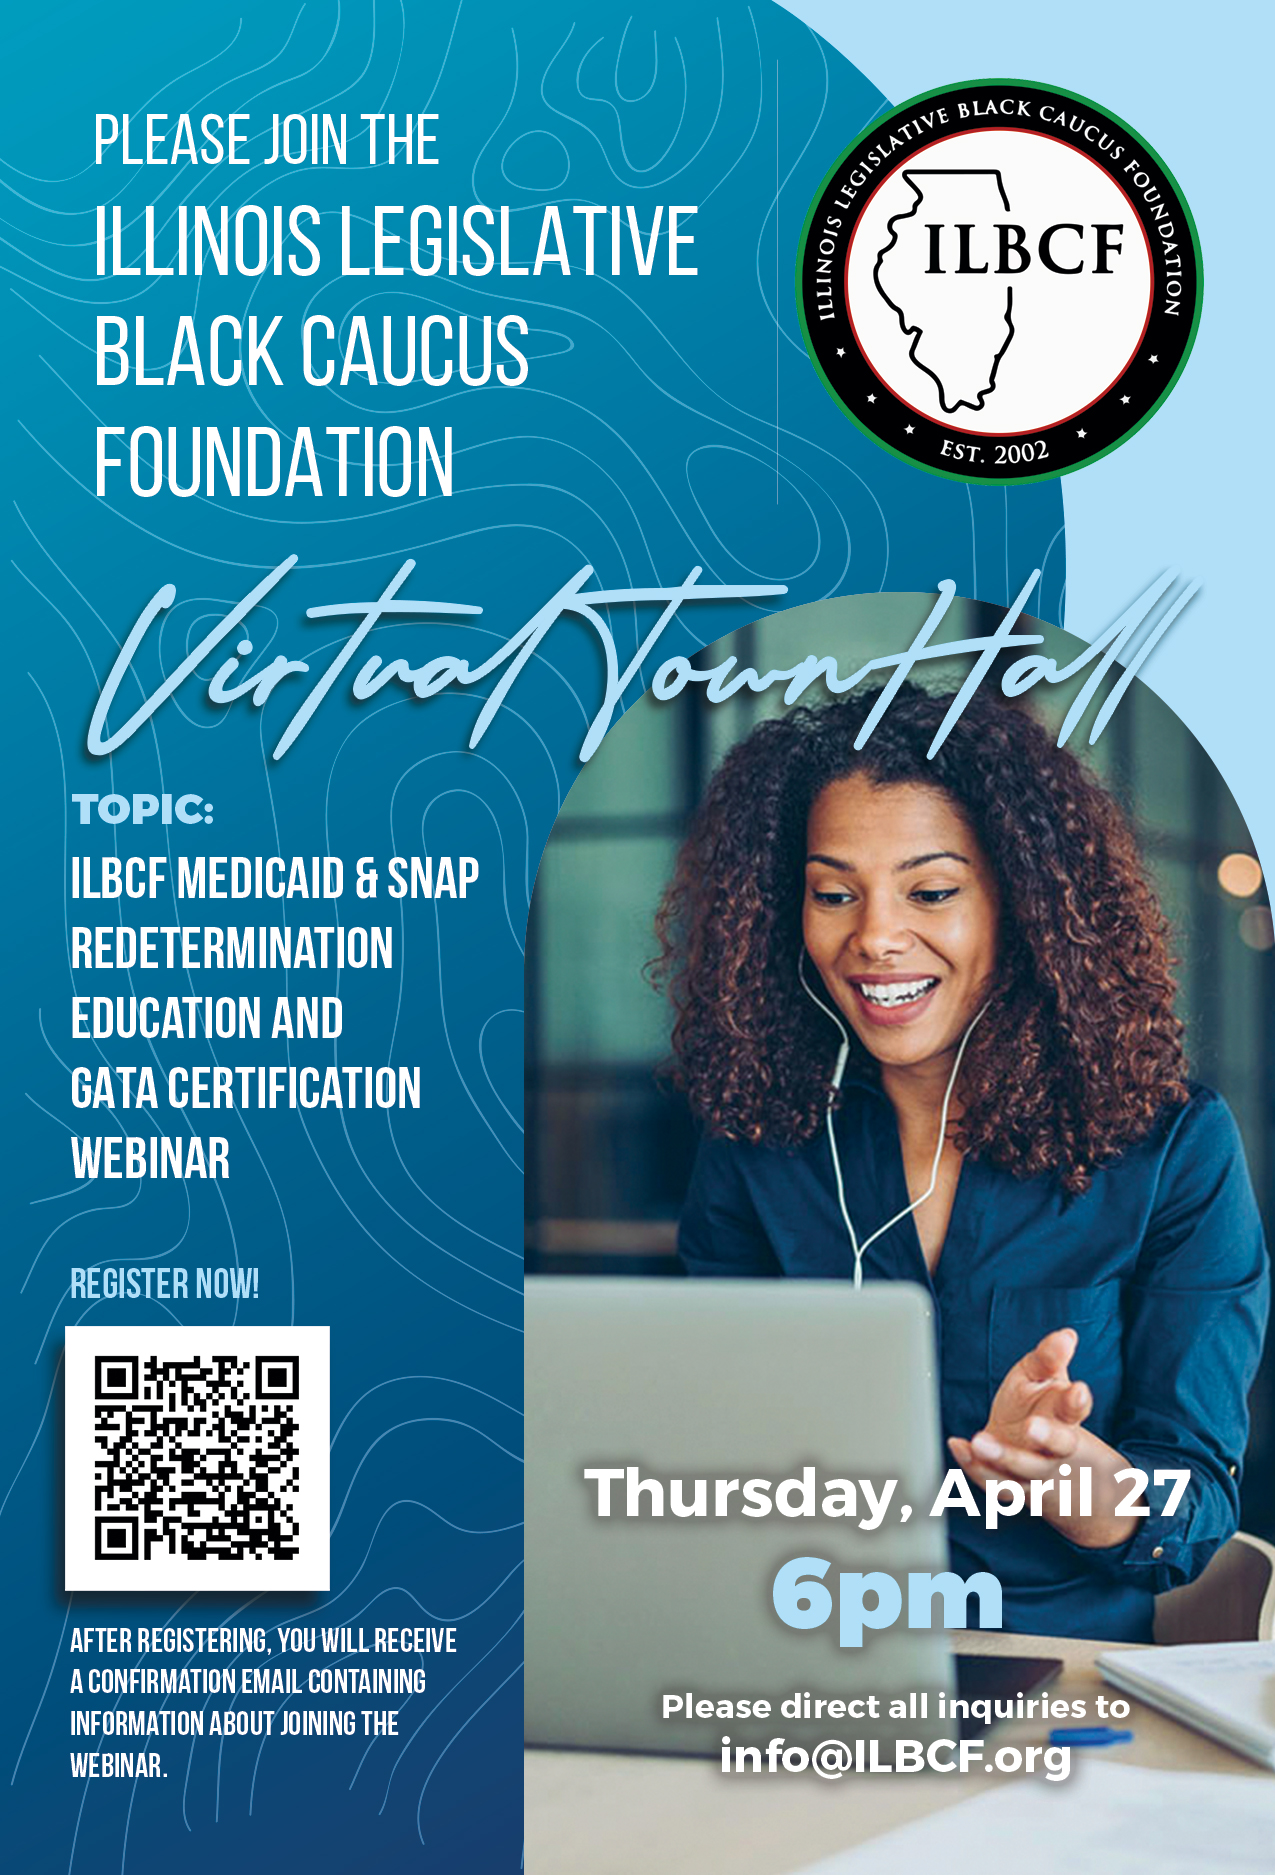 Please join the Illinois Legislative Black Caucus Foundation virtual town hall. Topics: Medicaid and SNAP redetermination, education, and GATA certification webinar. Thursday, April 27 at 6 p.m. Please direct all inquiries to info@ILBCF.org. After registering, you will receive a confirmation email containing information about joining the webinar.